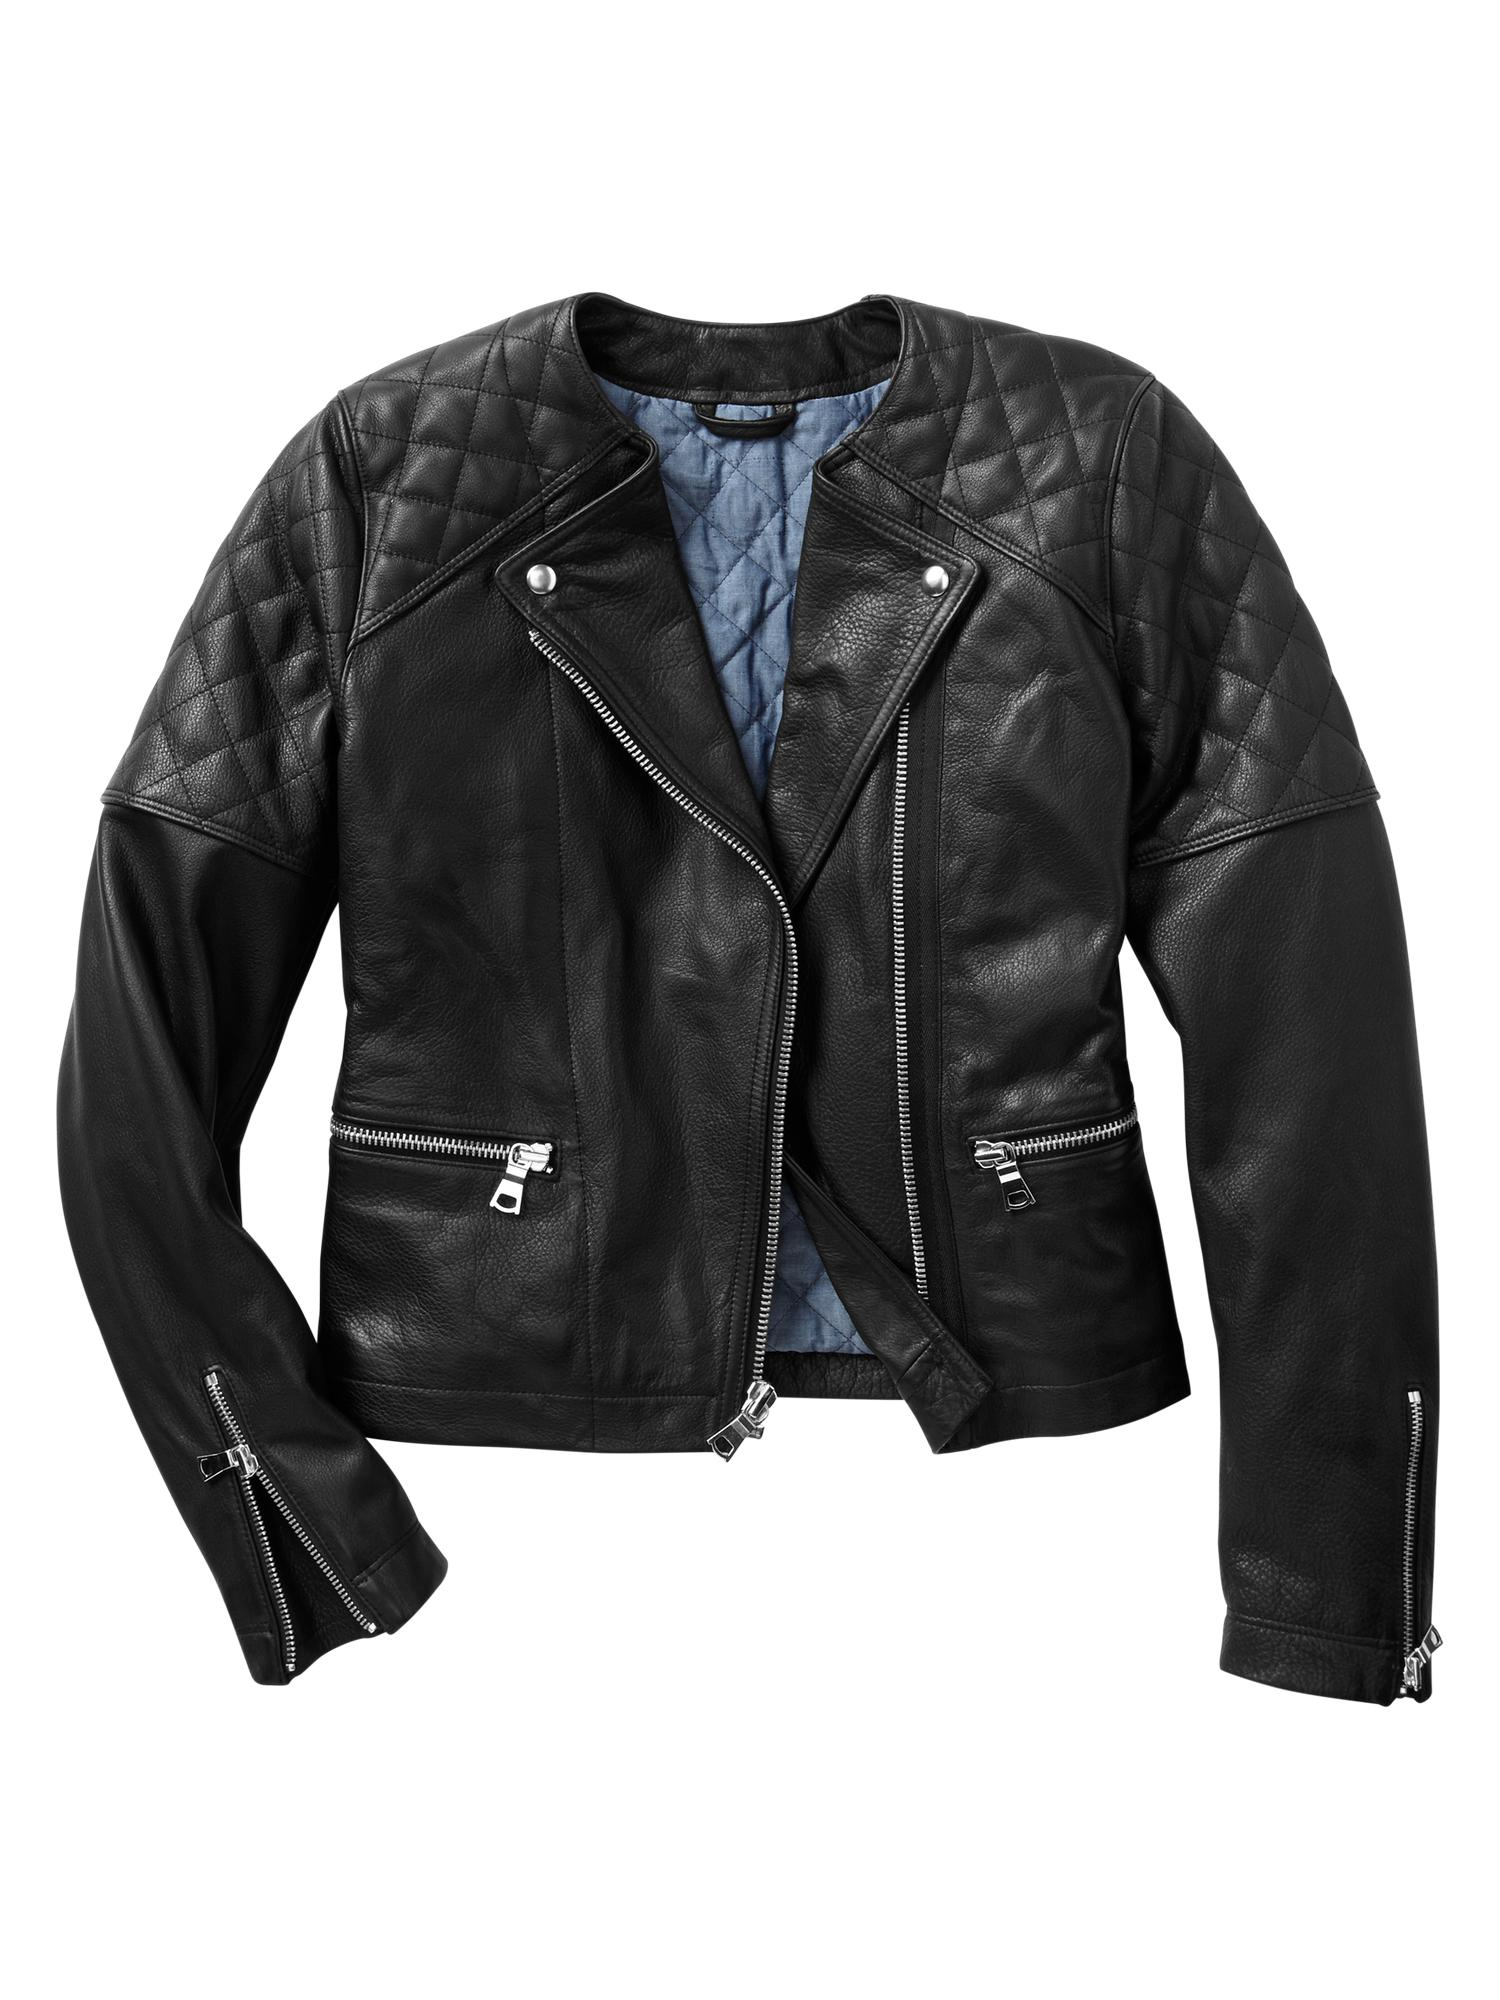 Gap Quilted Leather Moto Jacket in Black (true black ) Lyst